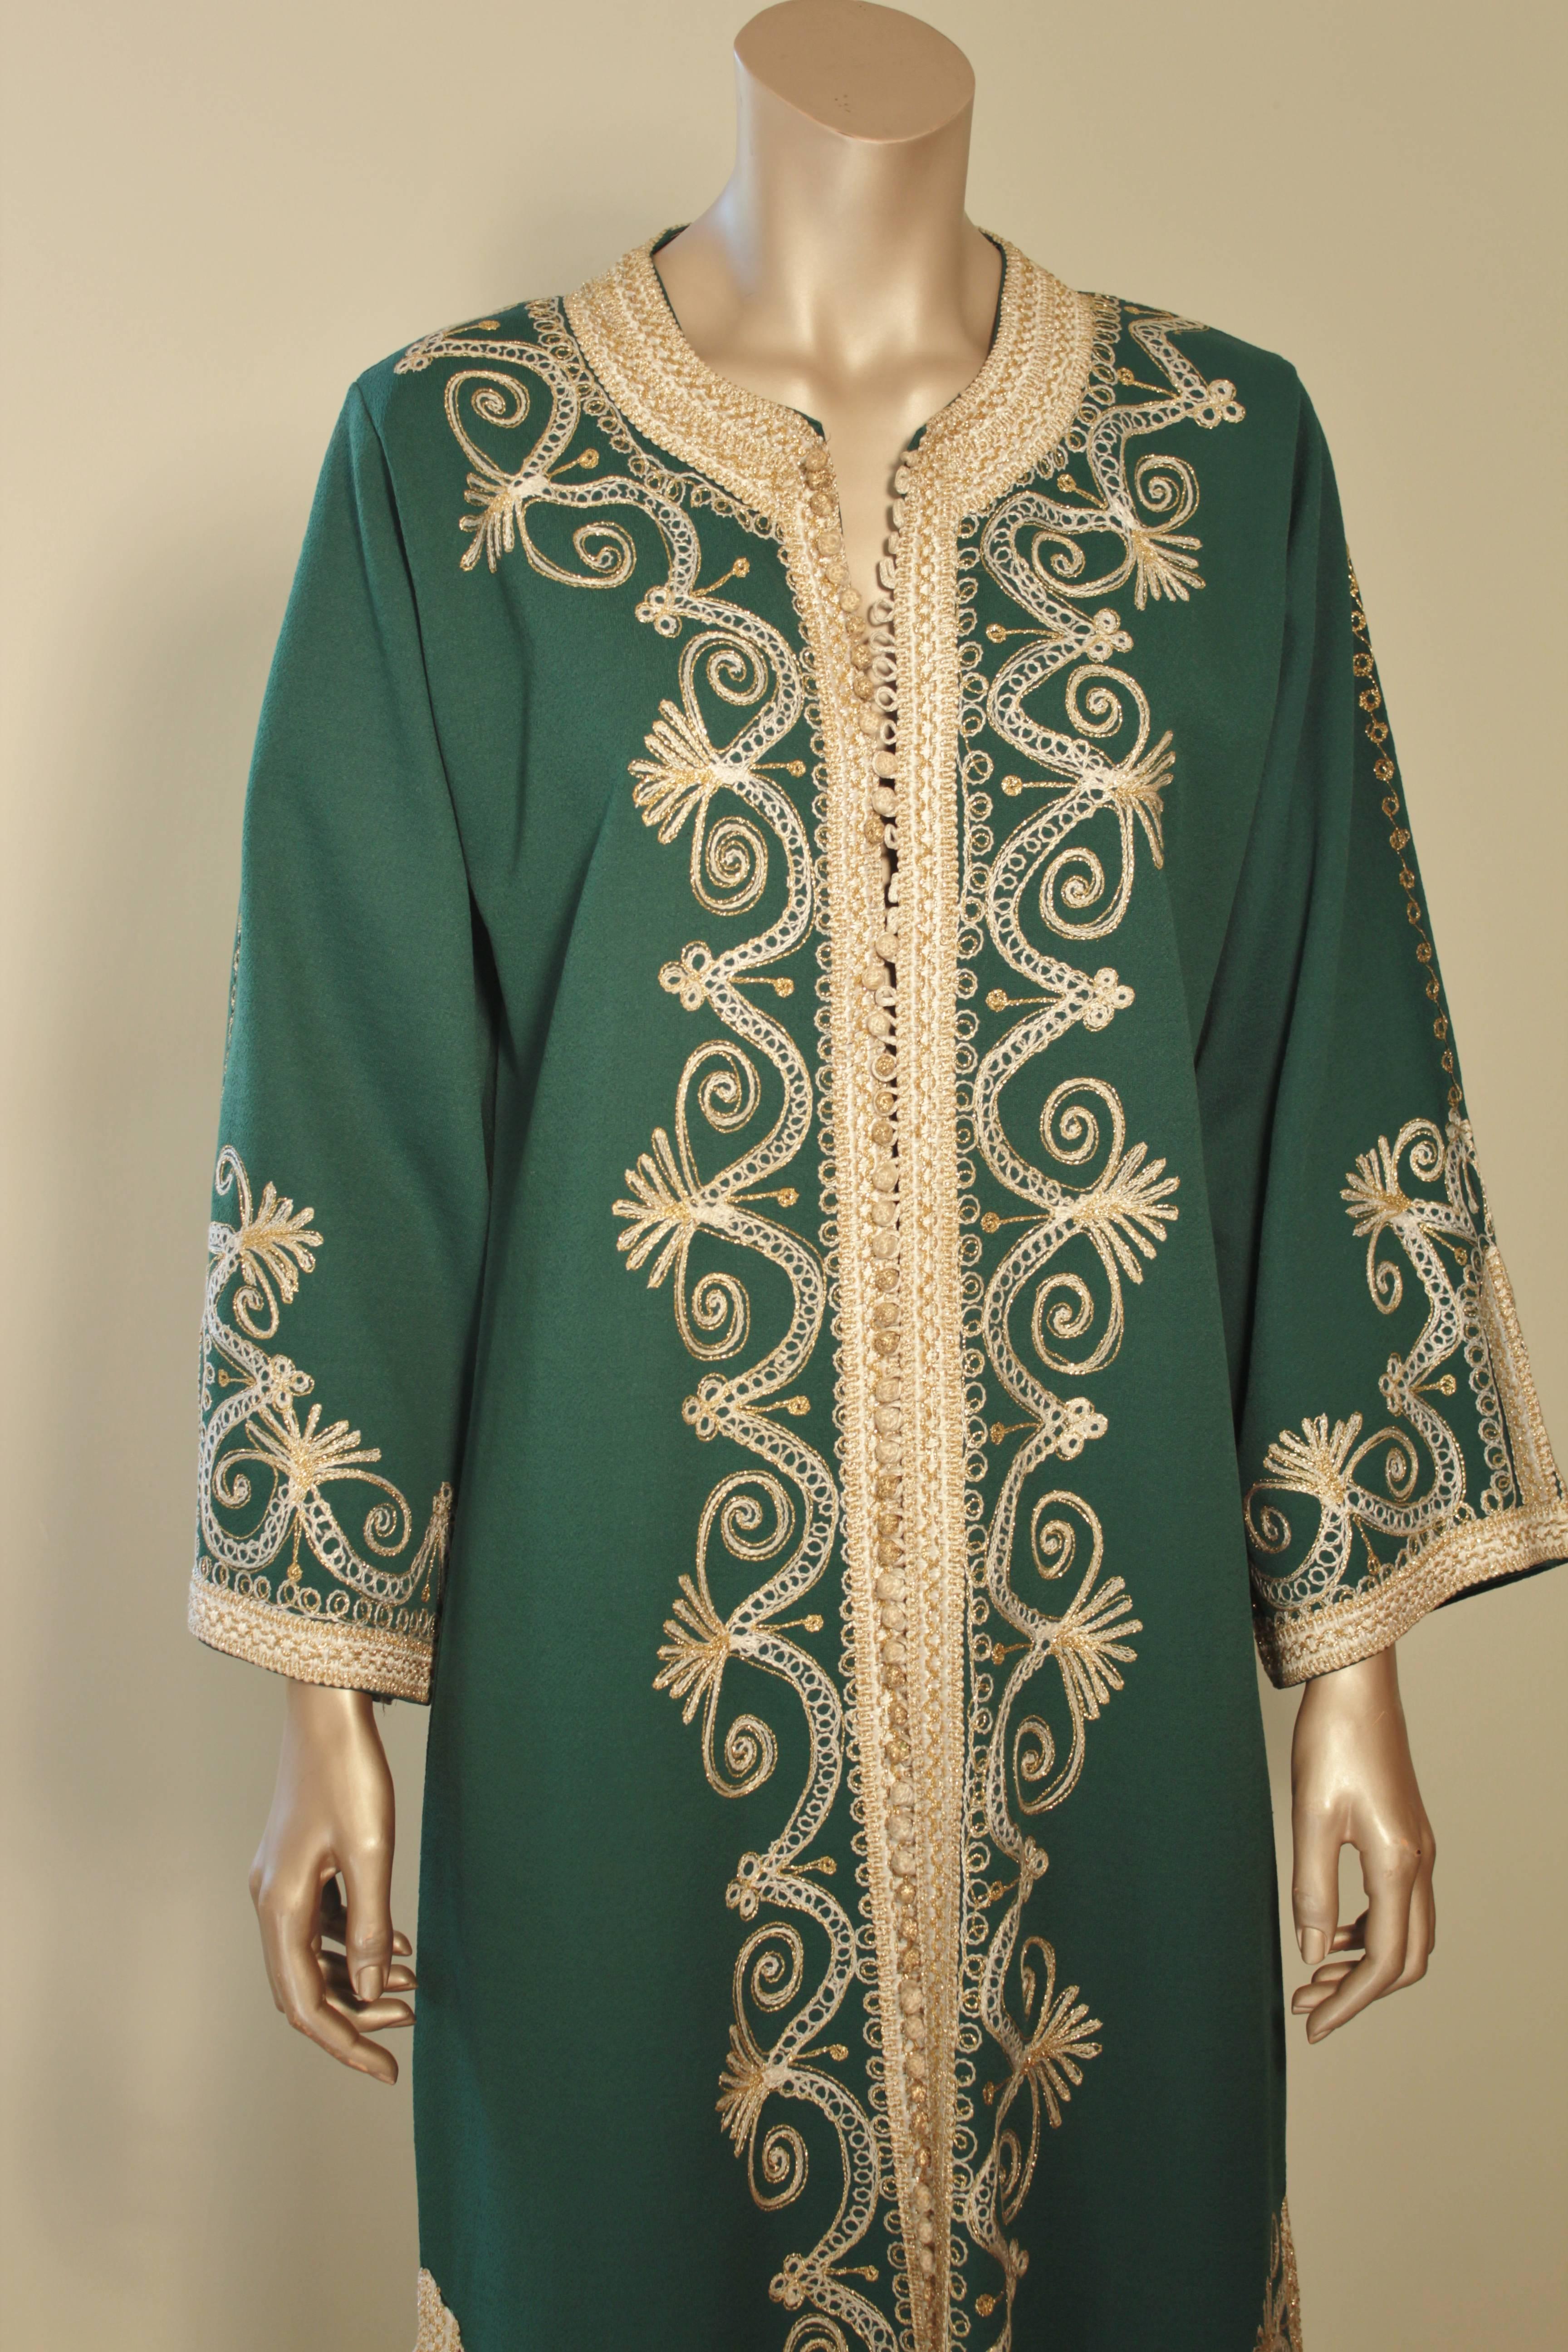 Vintage Moroccan green and gold embroidered caftan.
Elegant vintage Moroccan Kaftan, embroidered with gold threads design all over. 
The maxi poly jersey dress kaftan features a traditional neckline, with side slits and gently fluted embellished